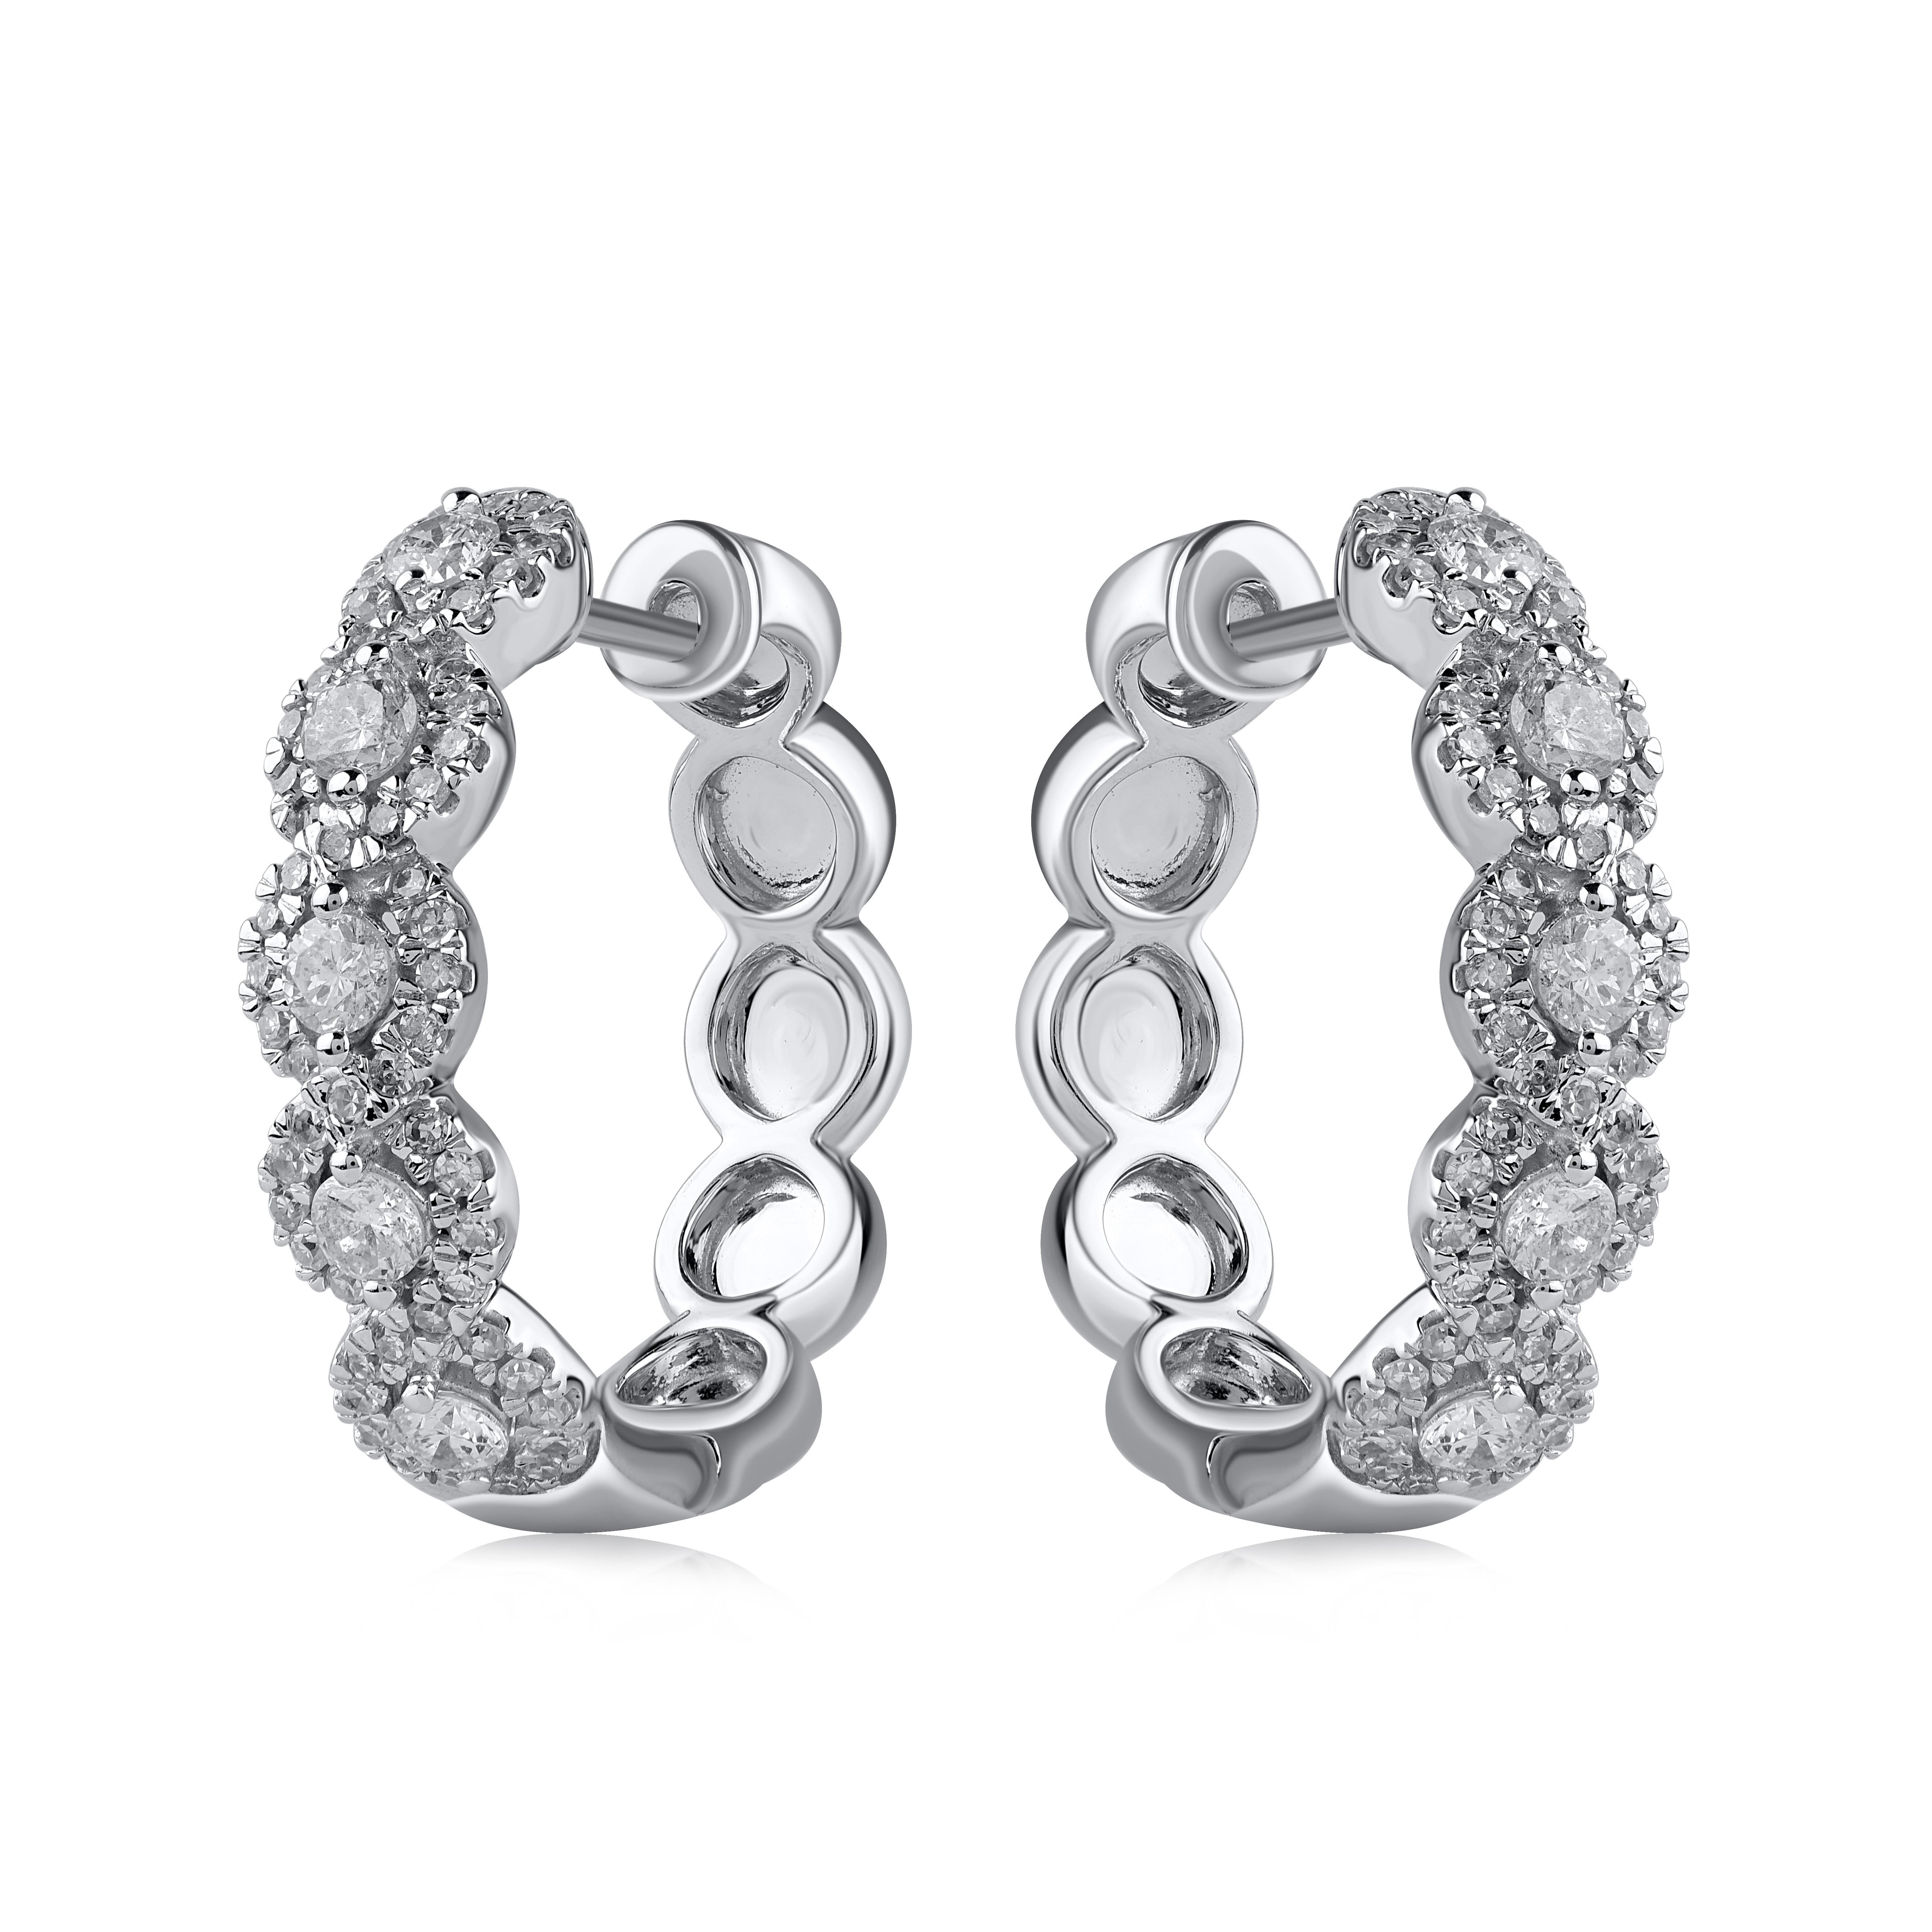 Timeless and elegant, these diamond hoop earring are a style you'll wear with every look in your wardrobe. Crafted in 14K white gold with 122 round diamond in prong setting. These earring secure with hinged backs. The white diamonds are graded as